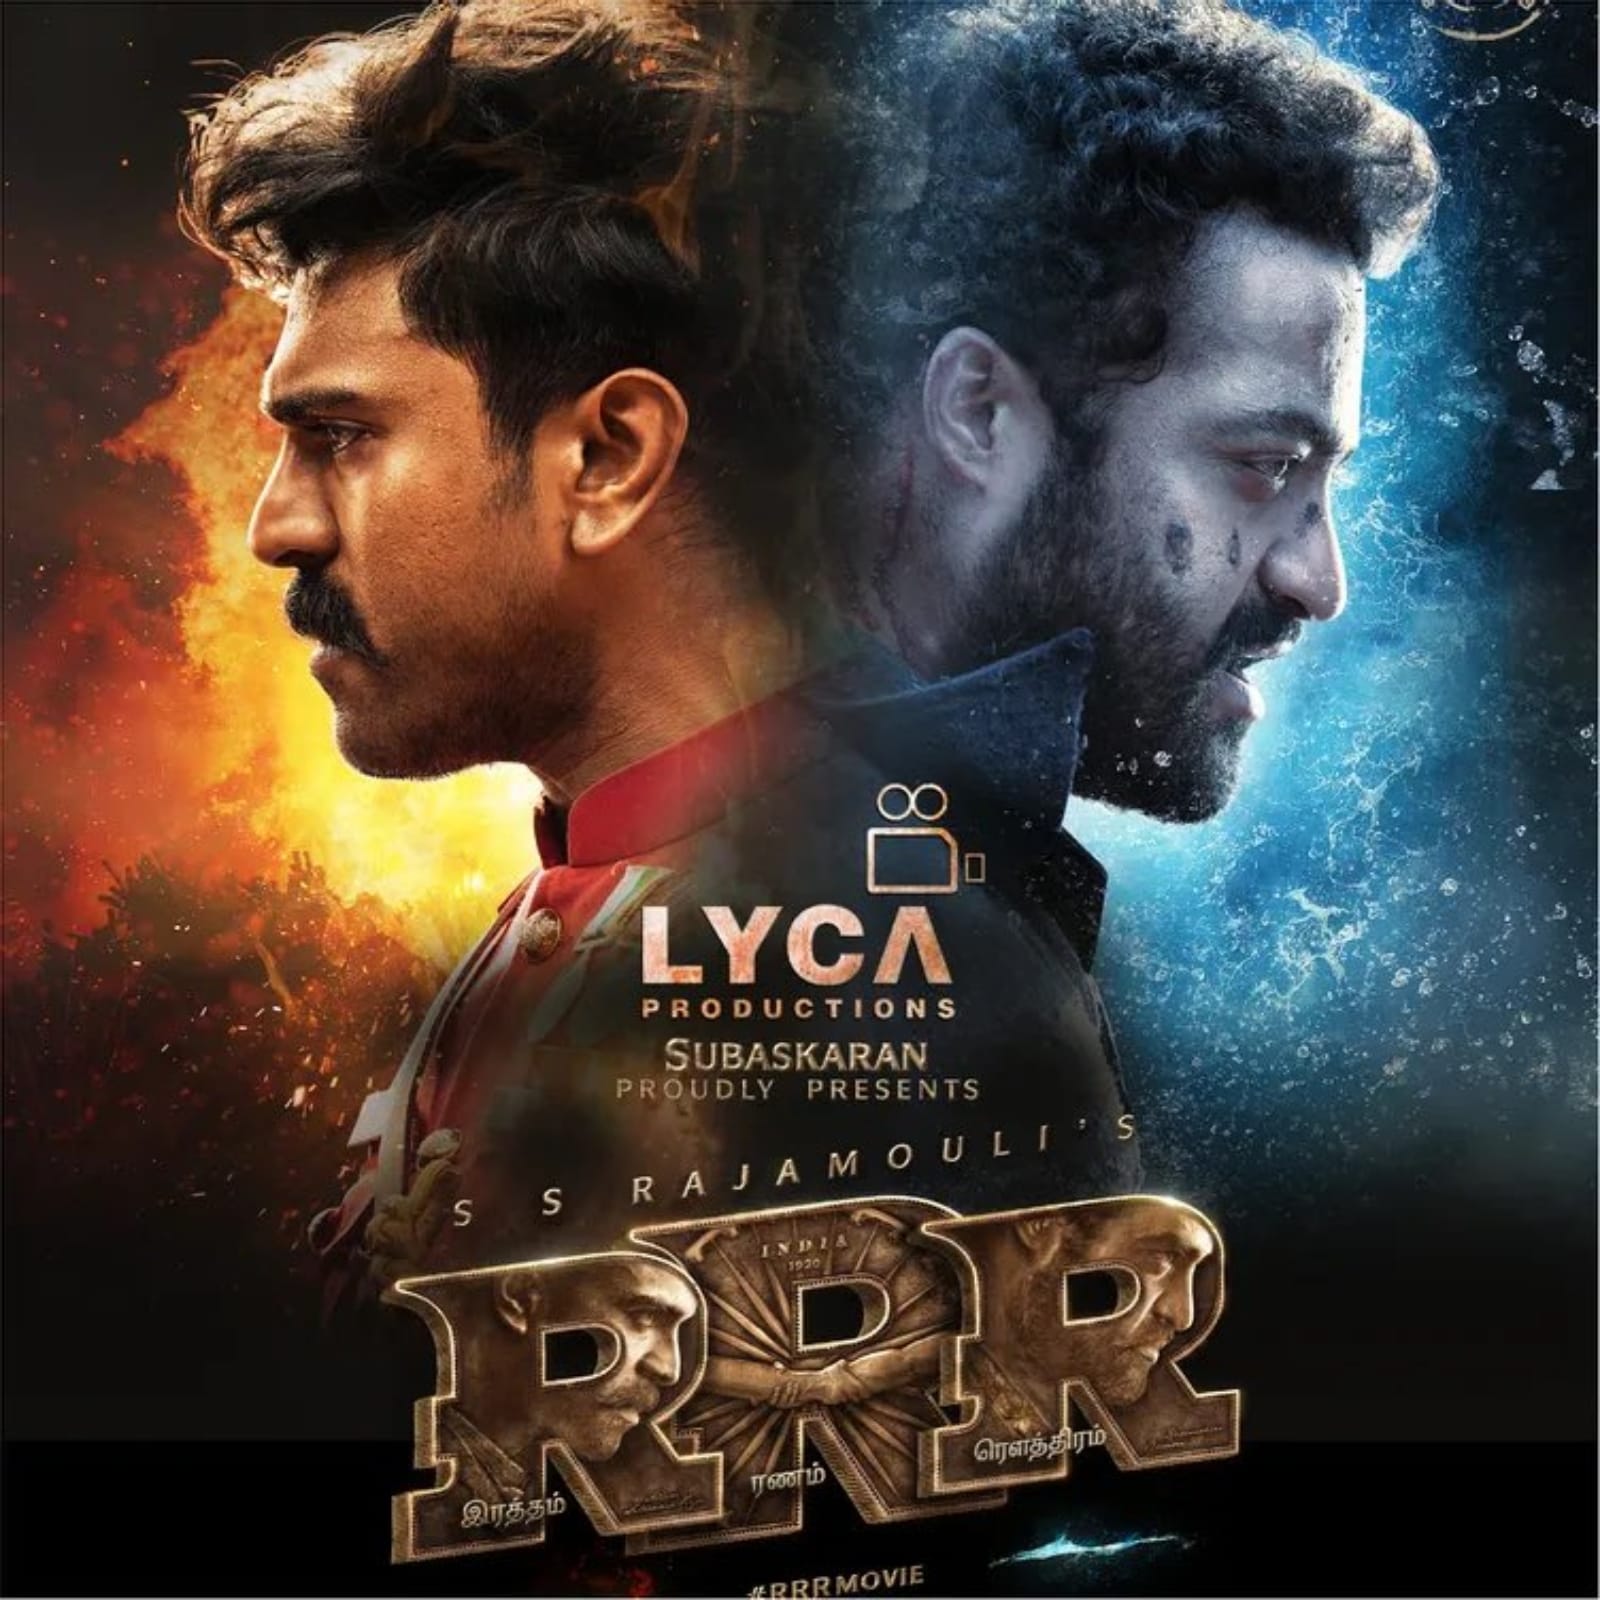 RRR Movie becomes the most rated film ever on BookMyShow